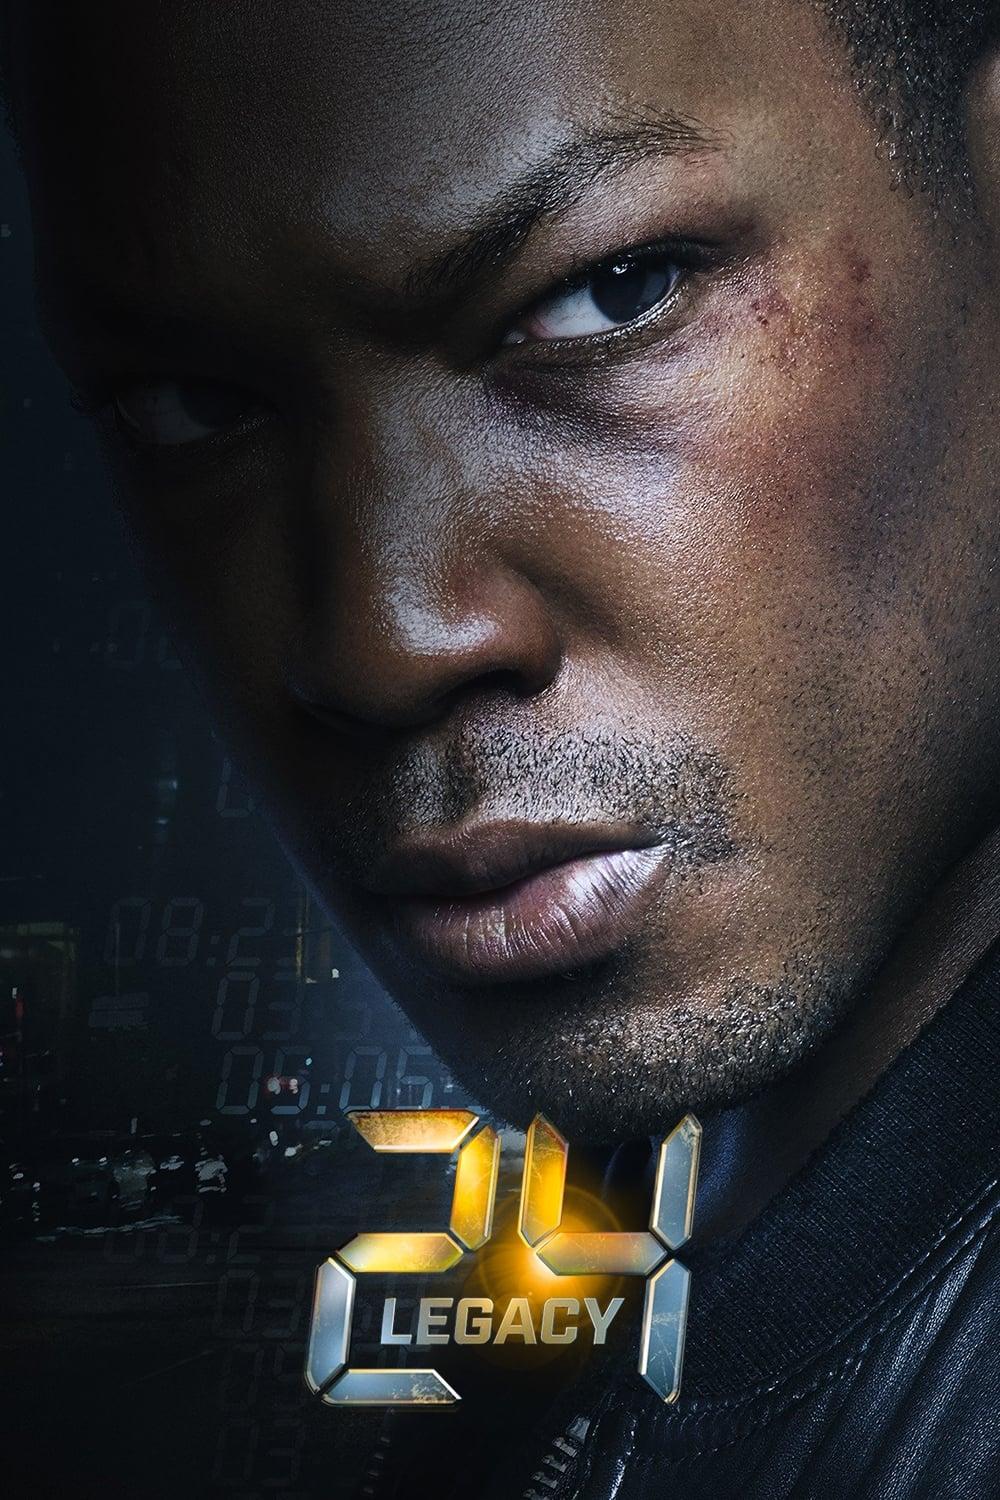 24: Legacy poster